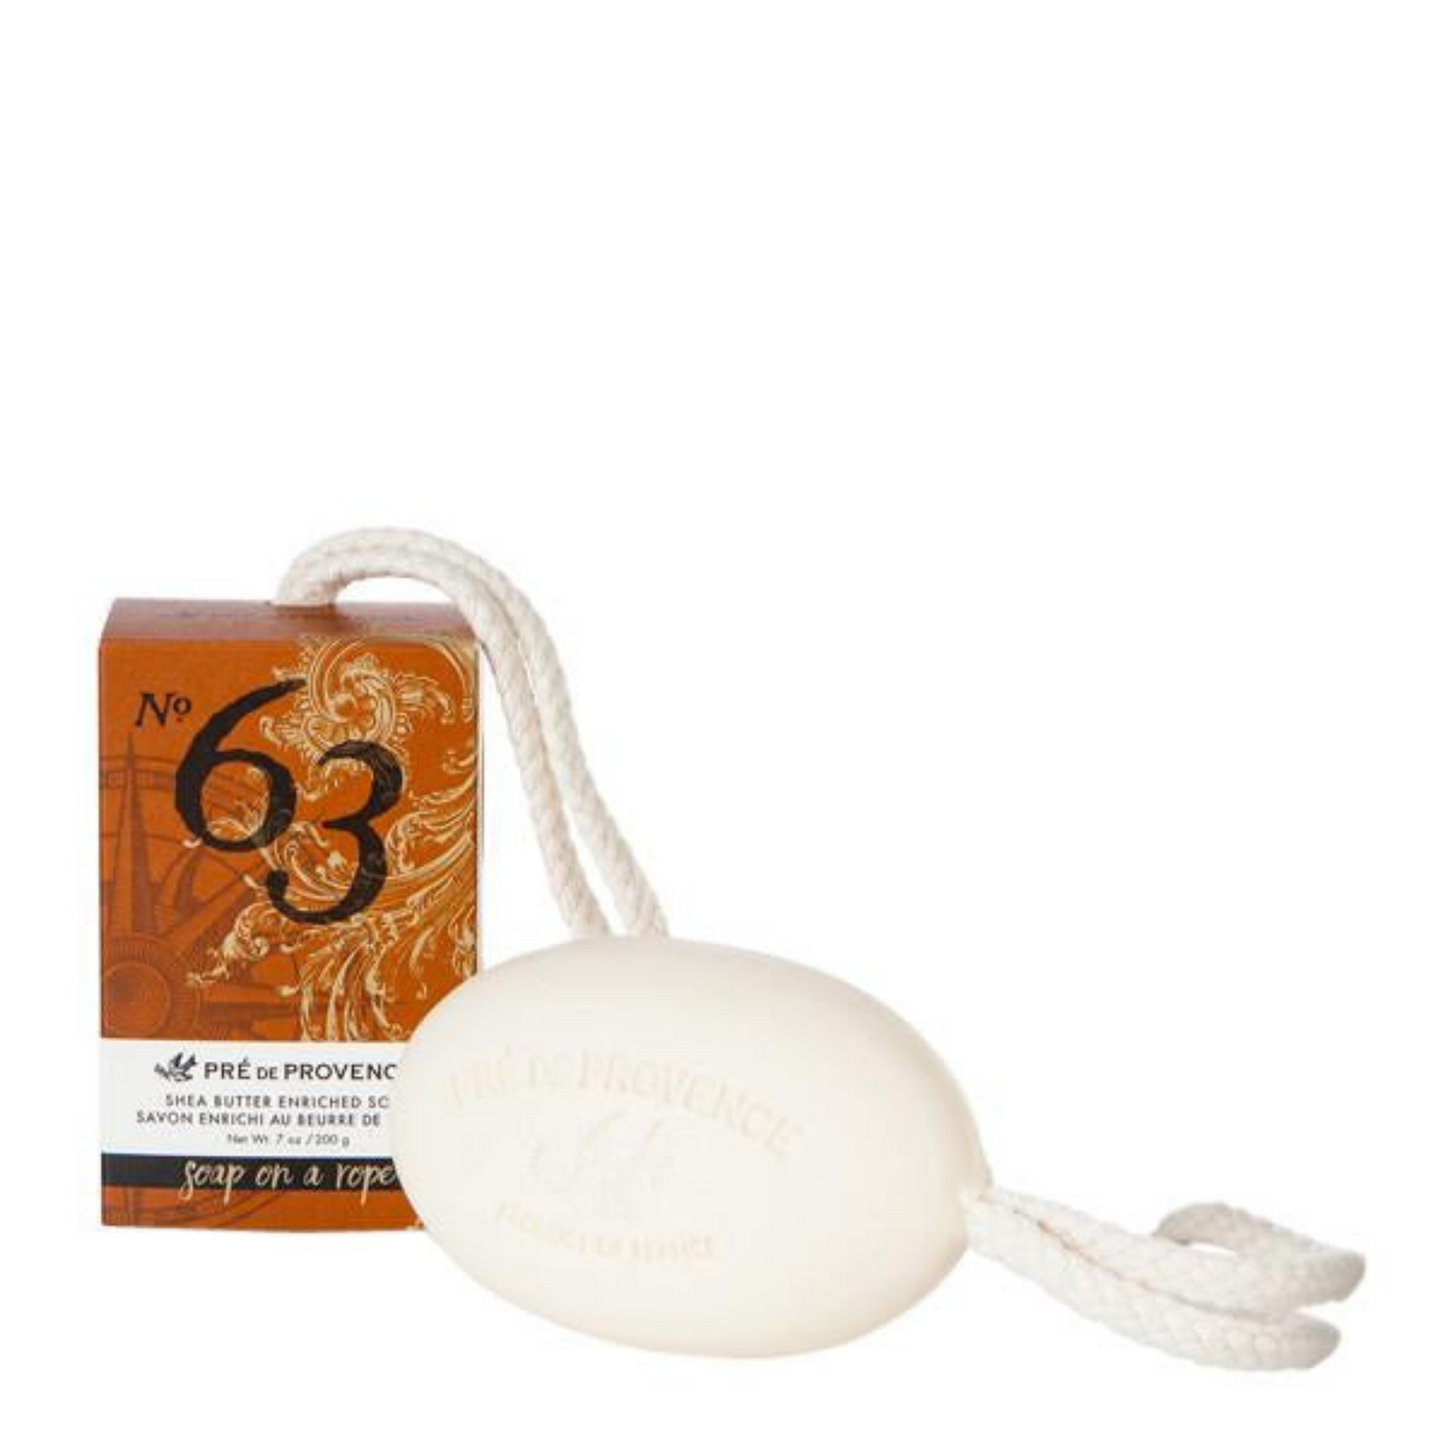 Primary Image of Soap On A Rope - No.63